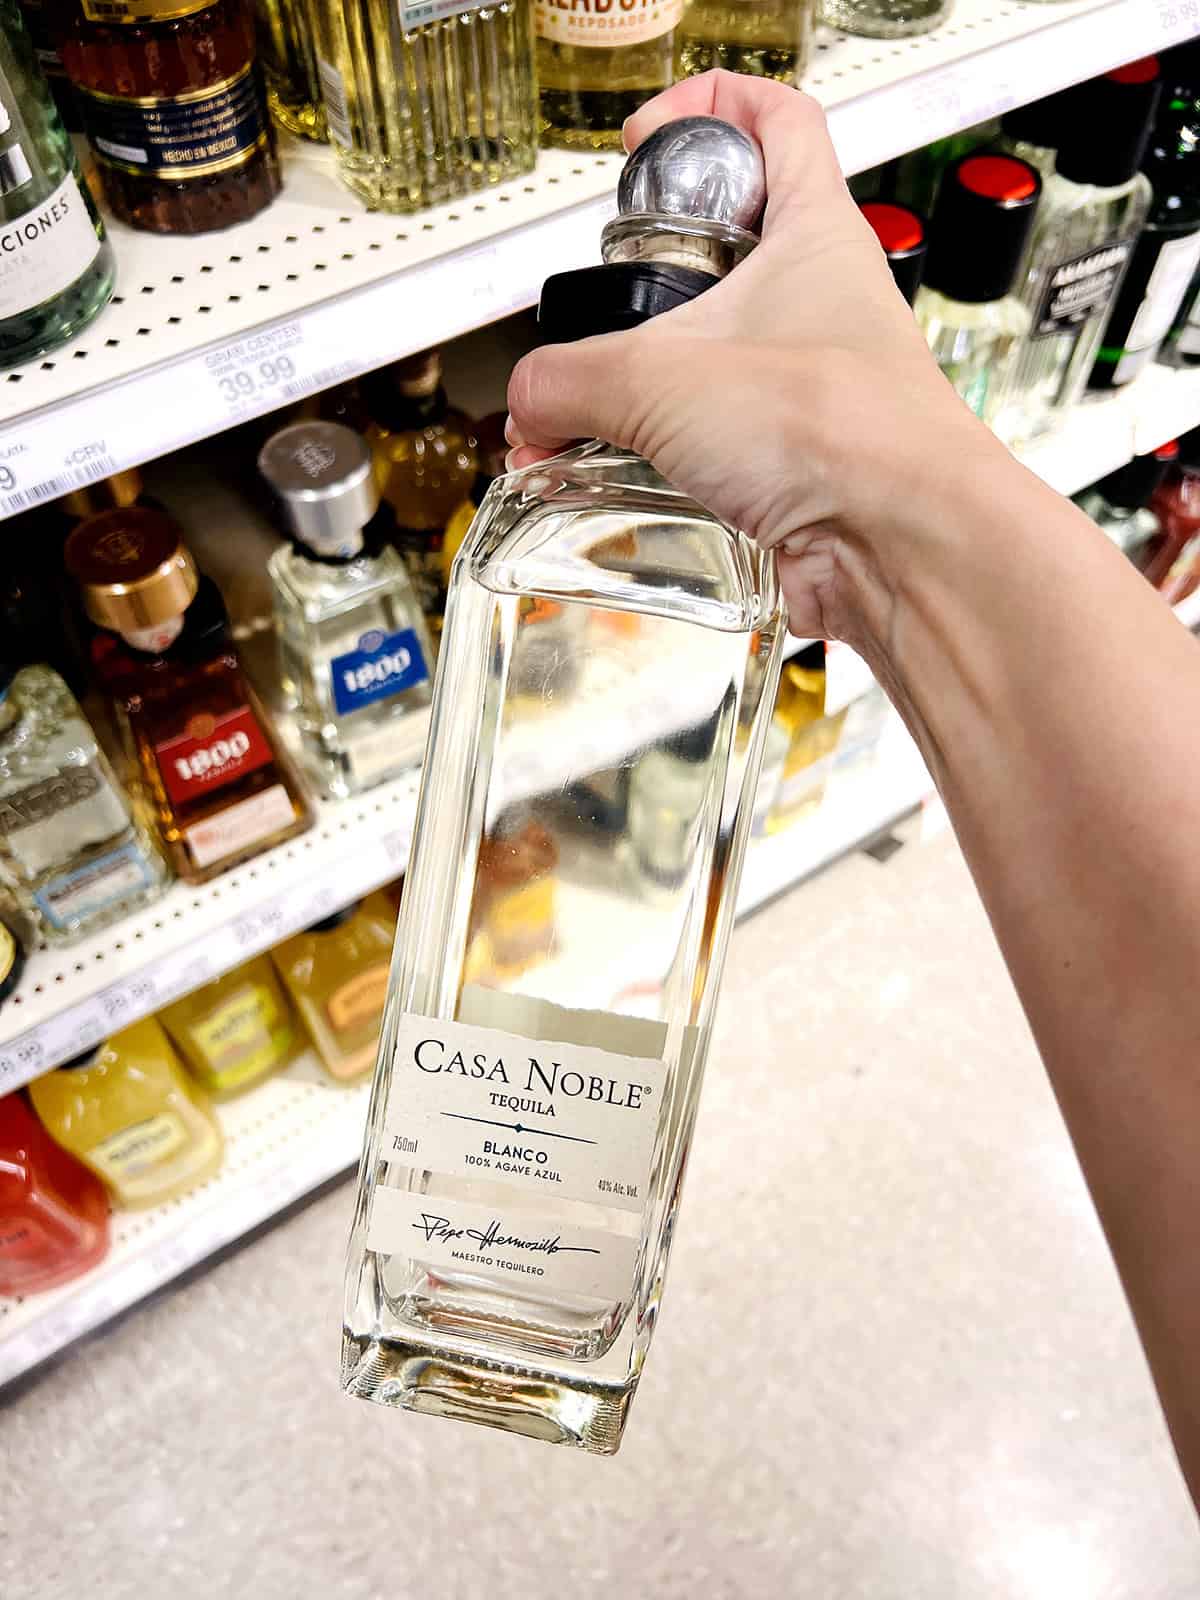 hand holding casa noble tequila bottle in grocery store aisle